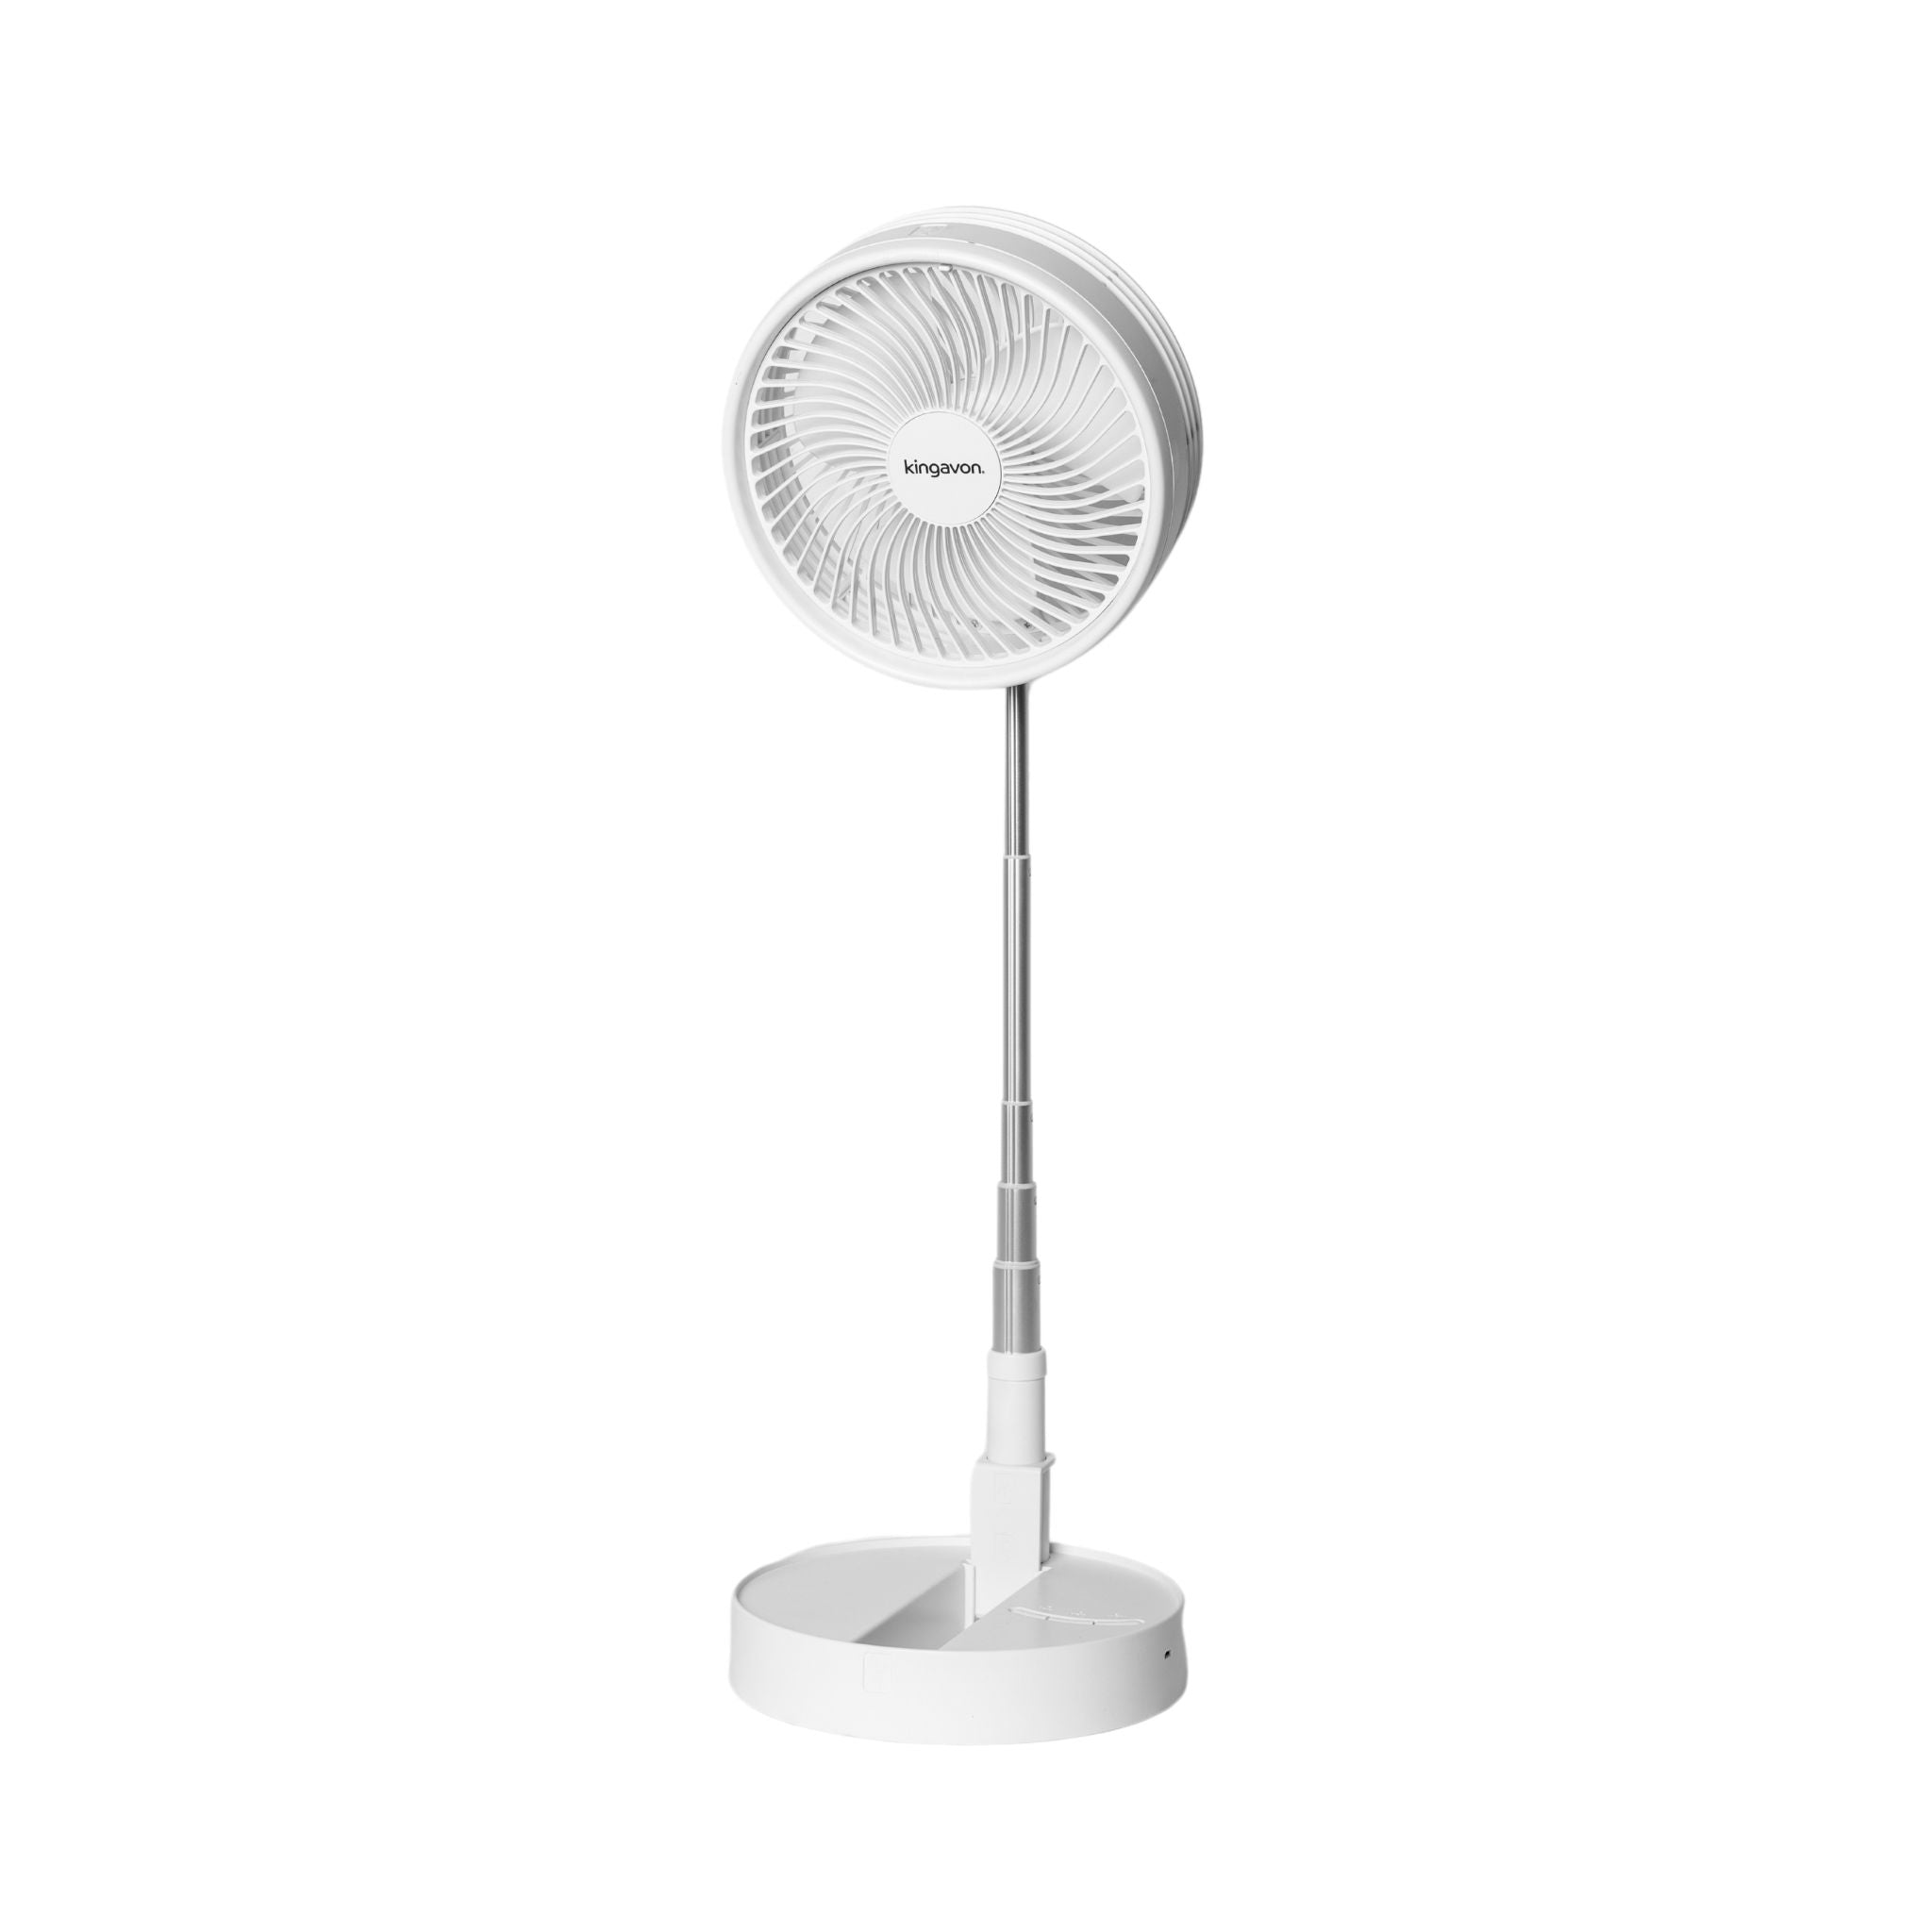 1m Tall Portable Telescopic Cordless Folding USB Rechargeable Cooling Fan in White